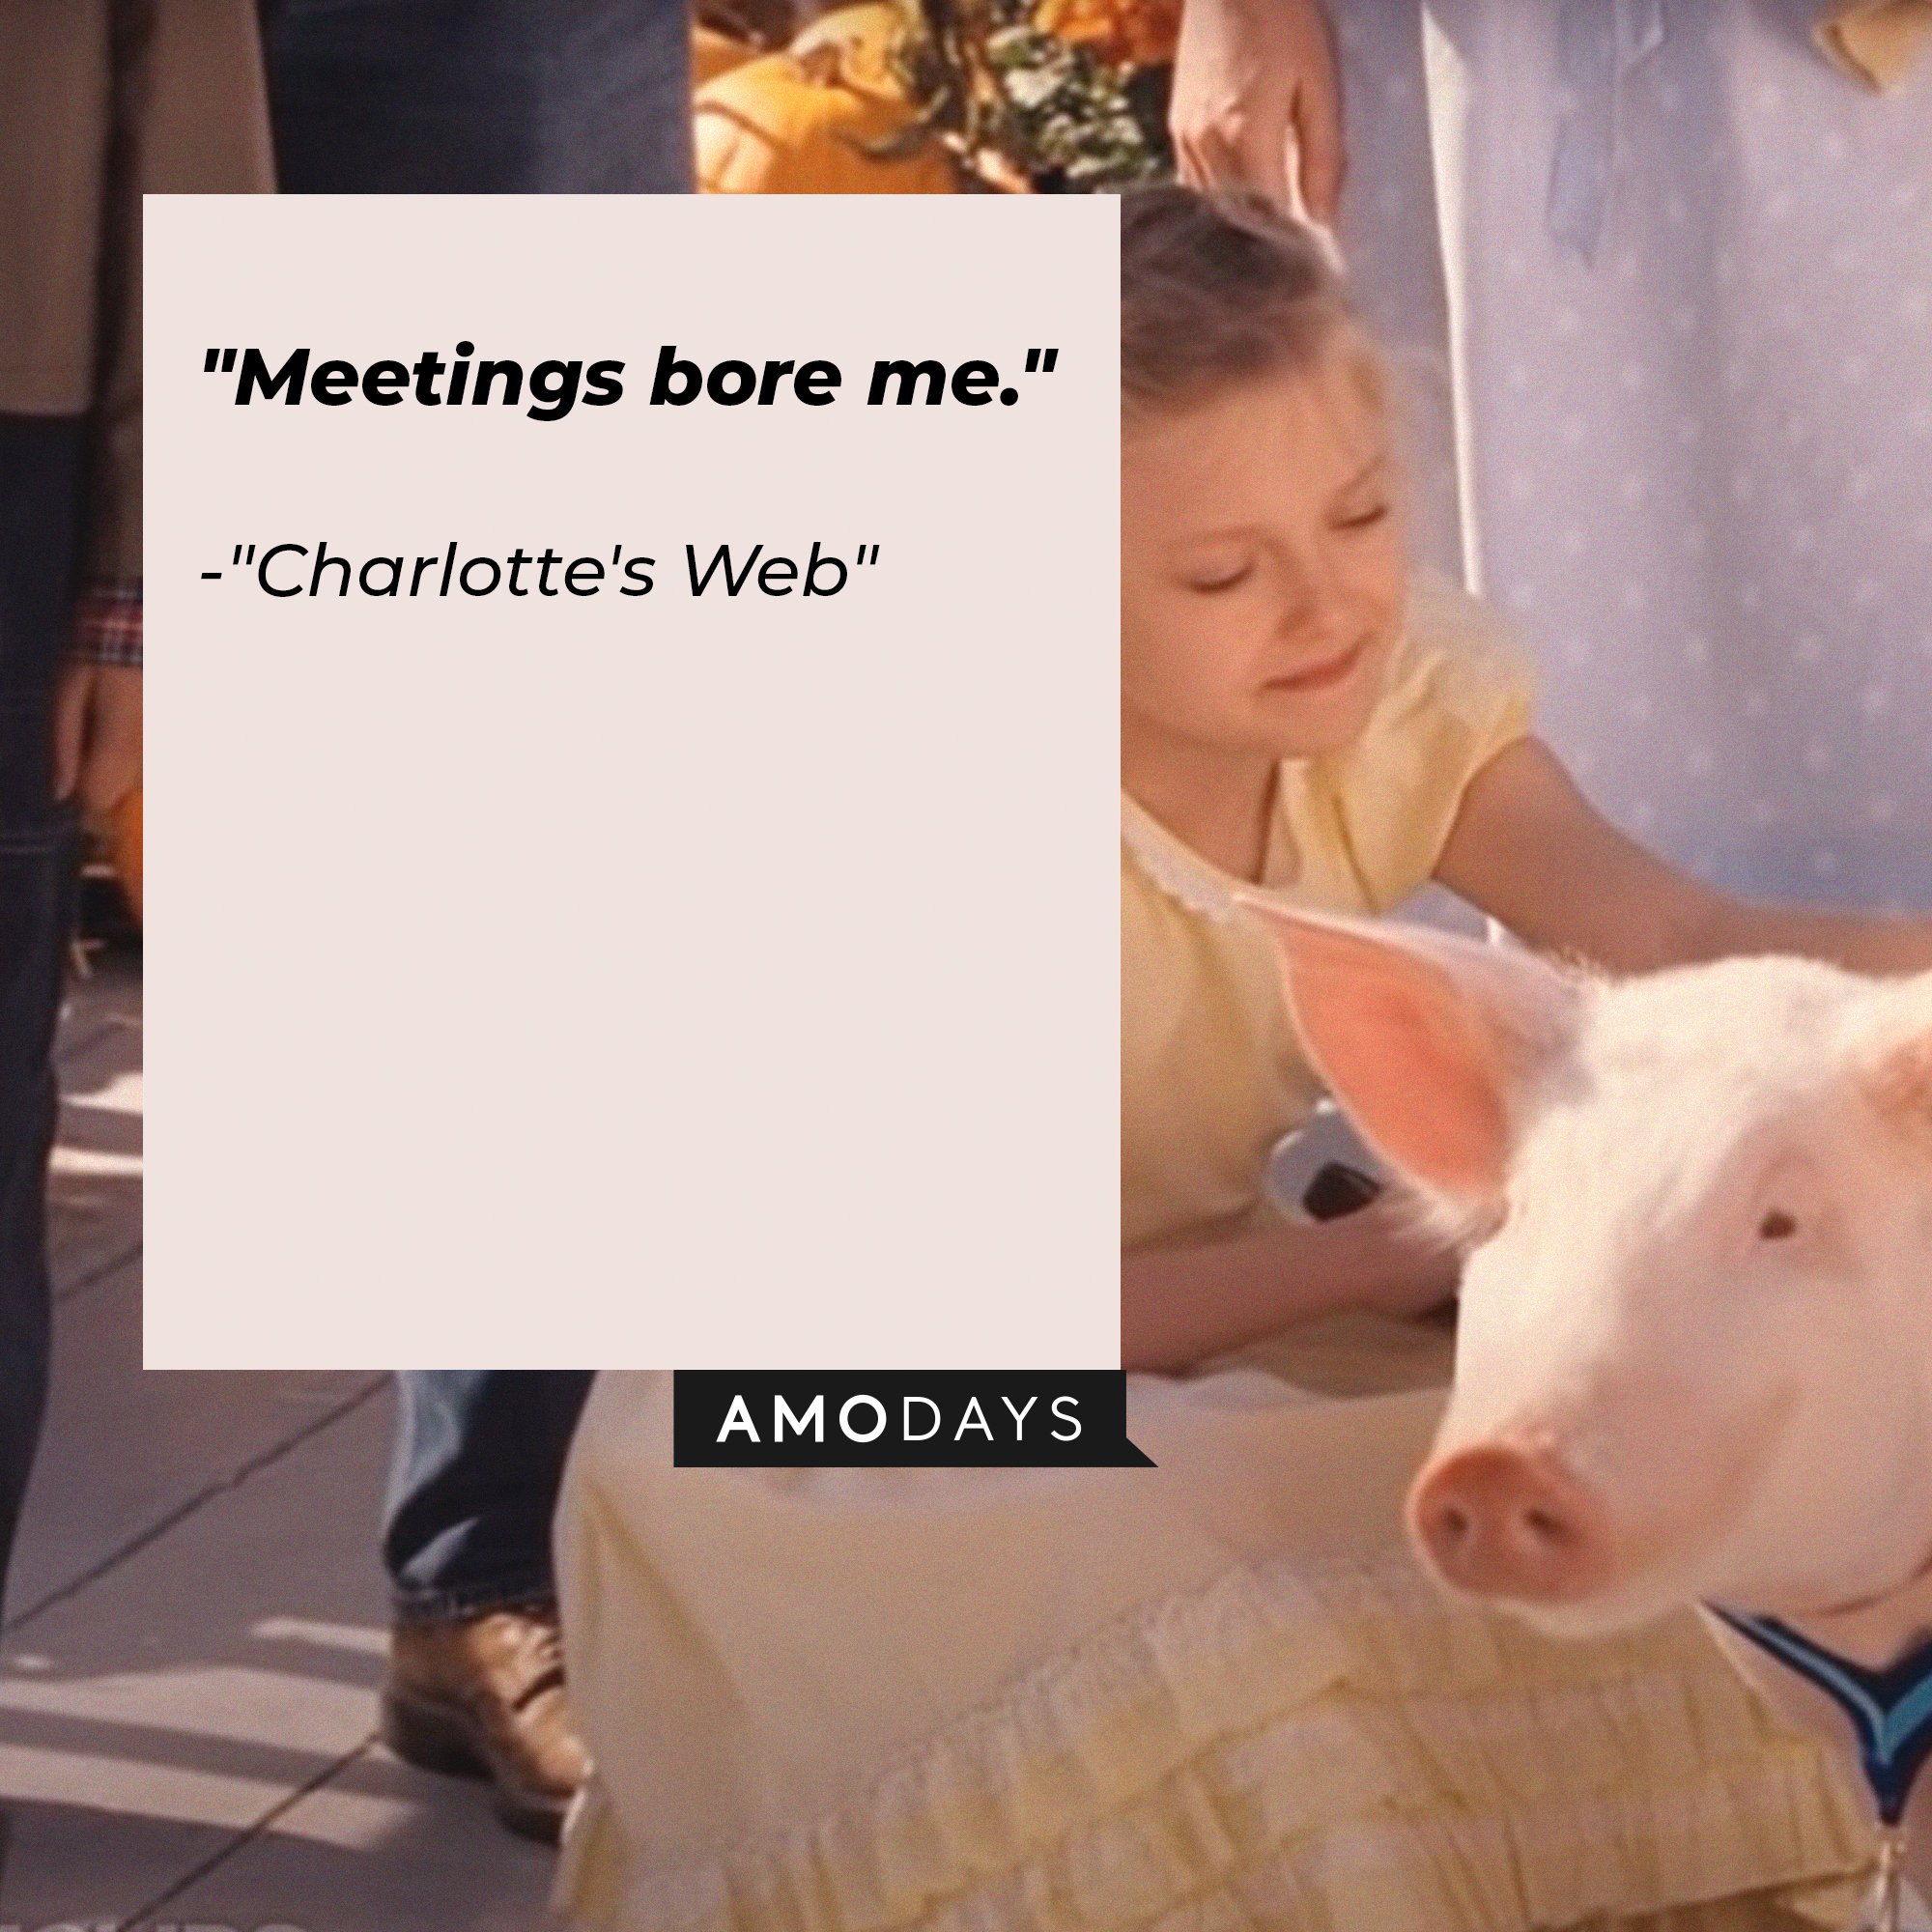 Charlotte's Web quote: "Meetings bore me." | Image: AmoDays